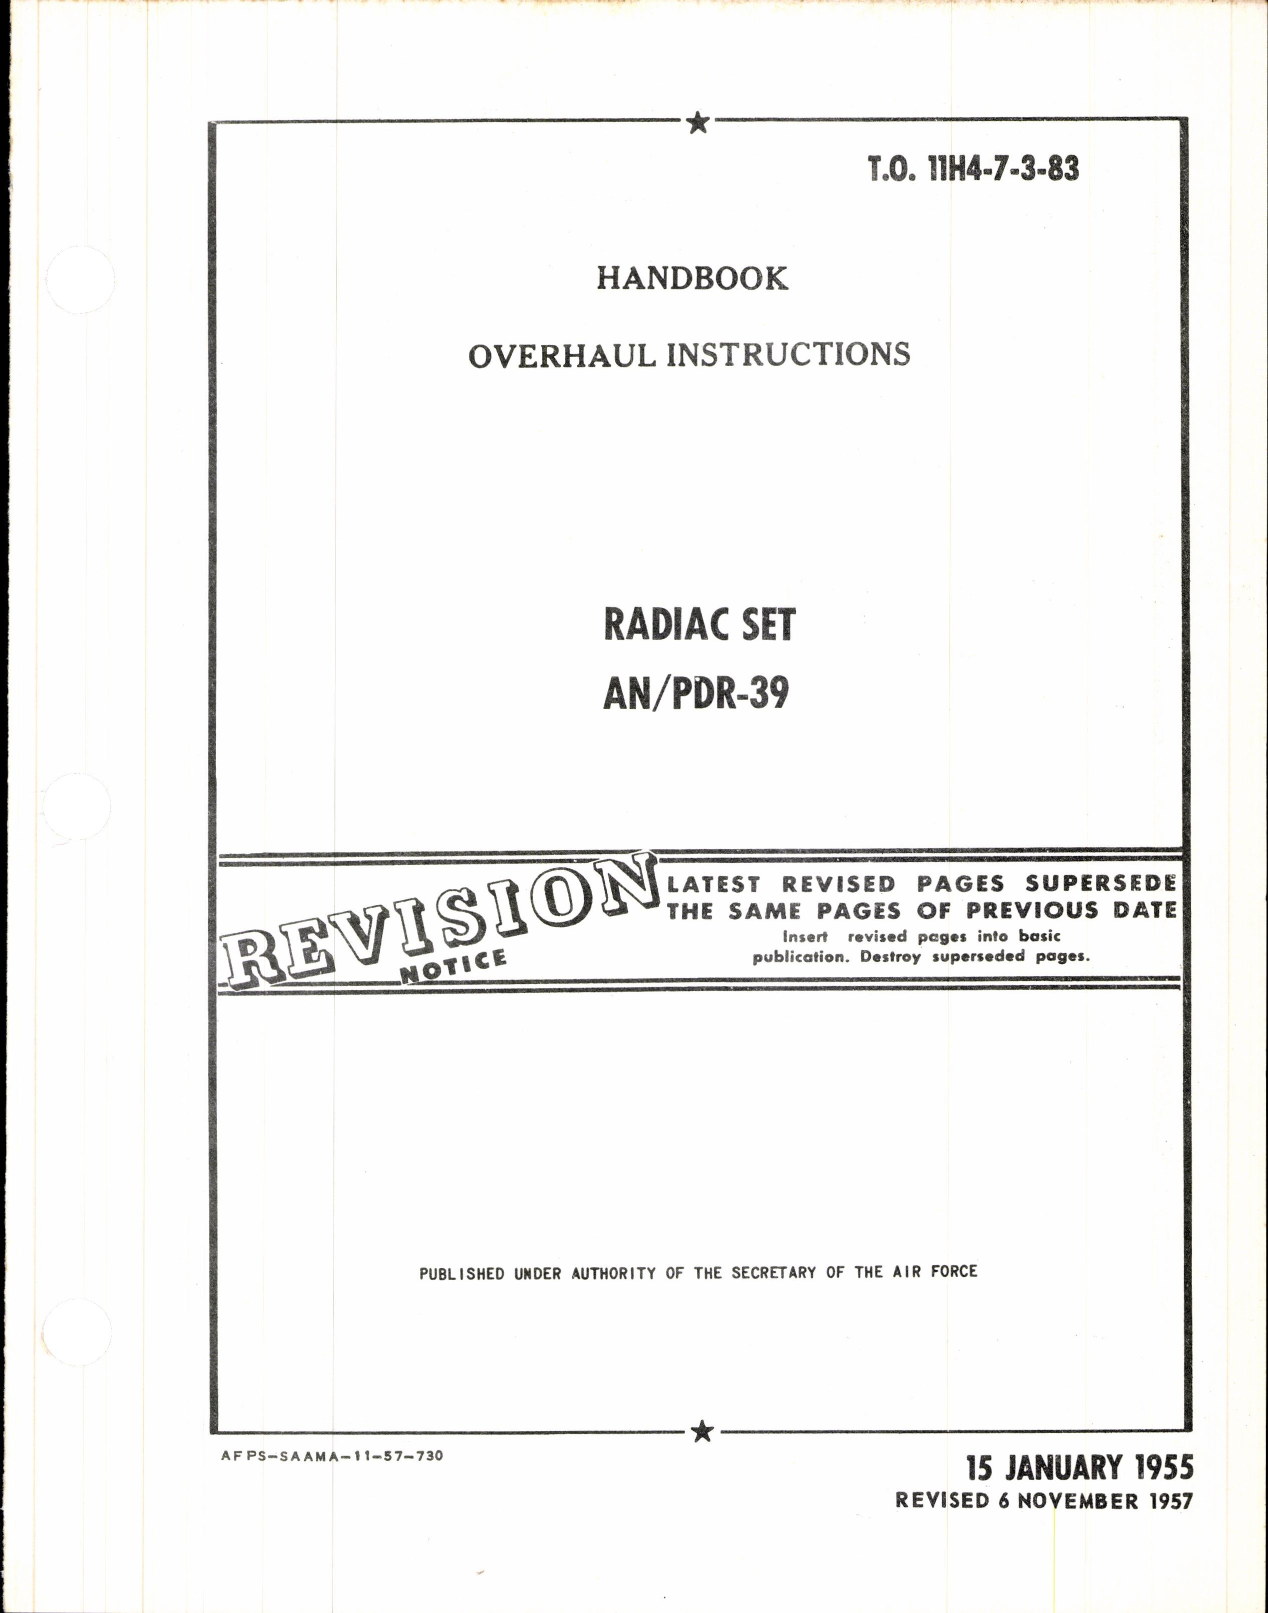 Sample page 1 from AirCorps Library document: Overhaul Instructions for Radiac Set AN/PDR-39